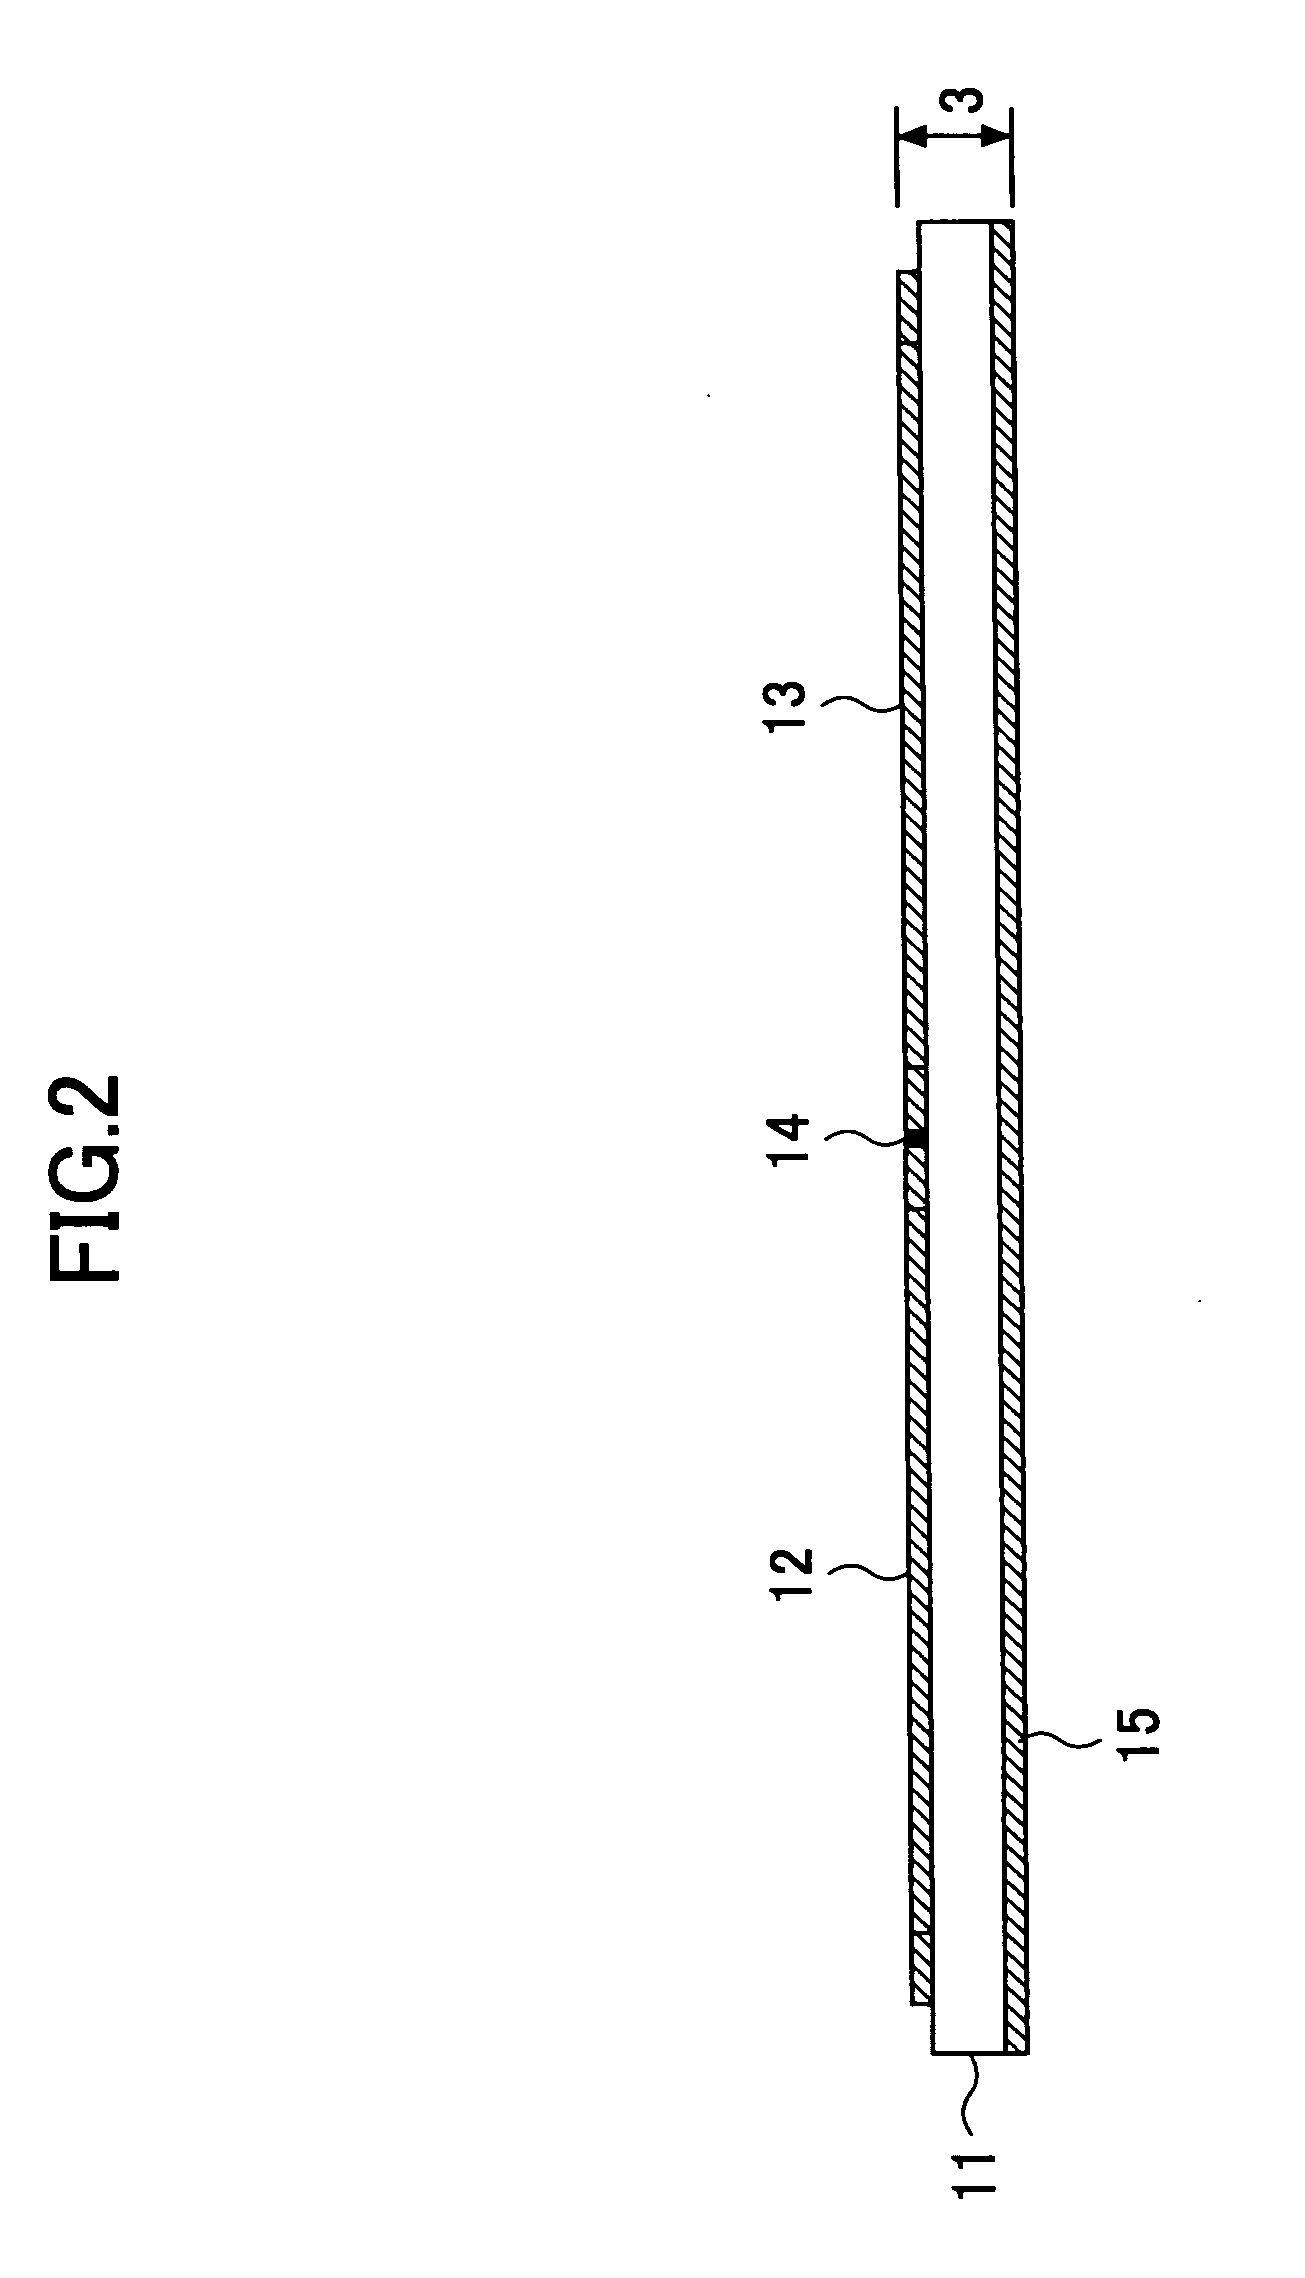 Radio frequency identification tag and antenna for radio frequency identification tag